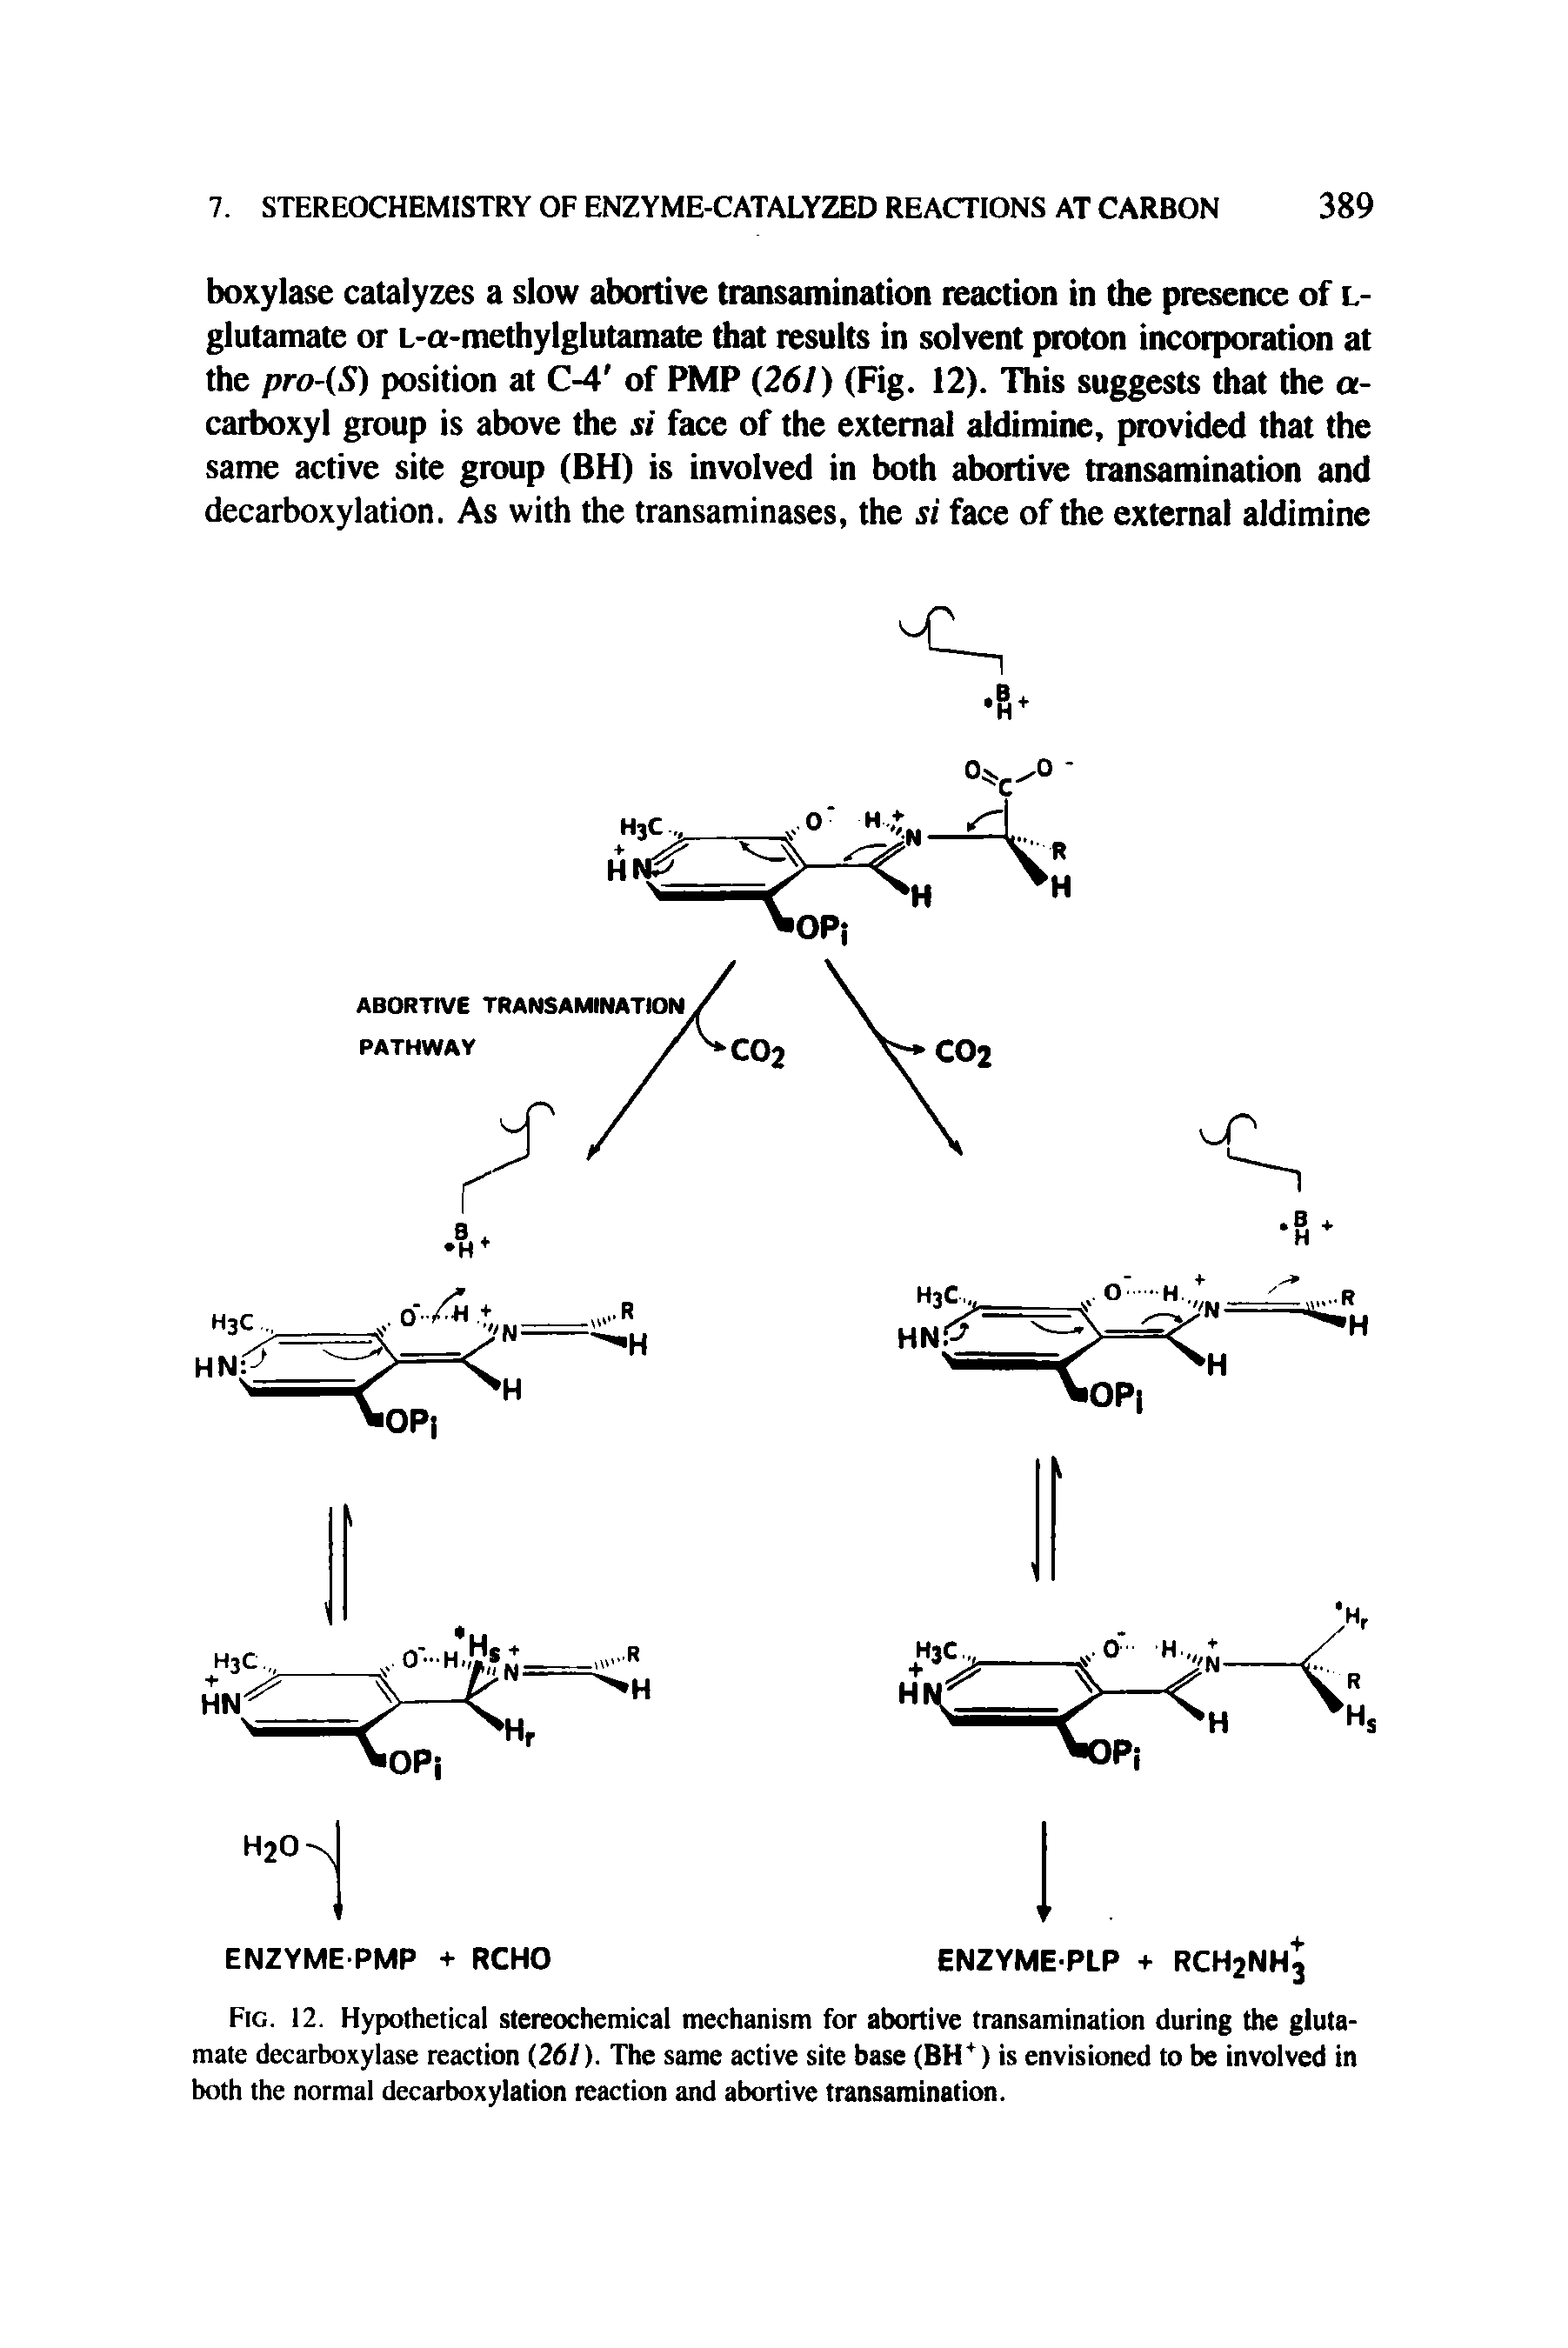 Fig. 12. Hypothetical stereochemical mechanism for abortive transamination during the glutamate decarboxylase reaction (261). The same active site base (BH ) is envisioned to be involved in both the normal decarboxylation reaction and abortive transamination.